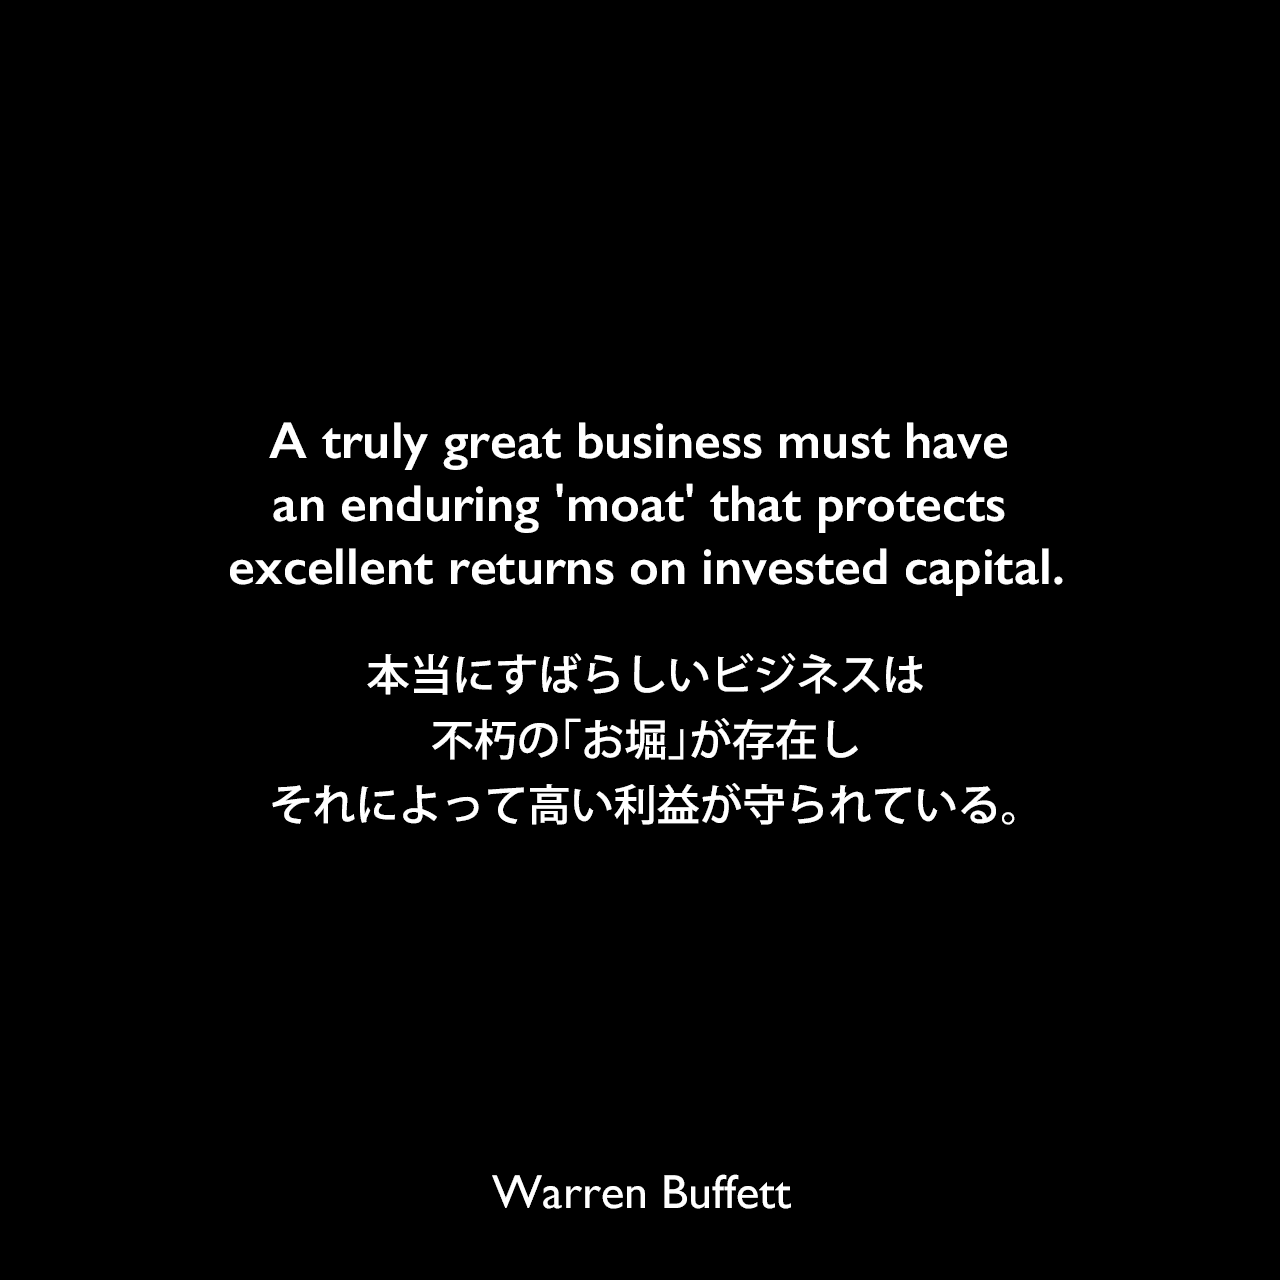 A truly great business must have an enduring 'moat' that protects excellent returns on invested capital.本当にすばらしいビジネスは不朽の「お堀」が存在し、それによって高い利益が守られている。Warren Buffett